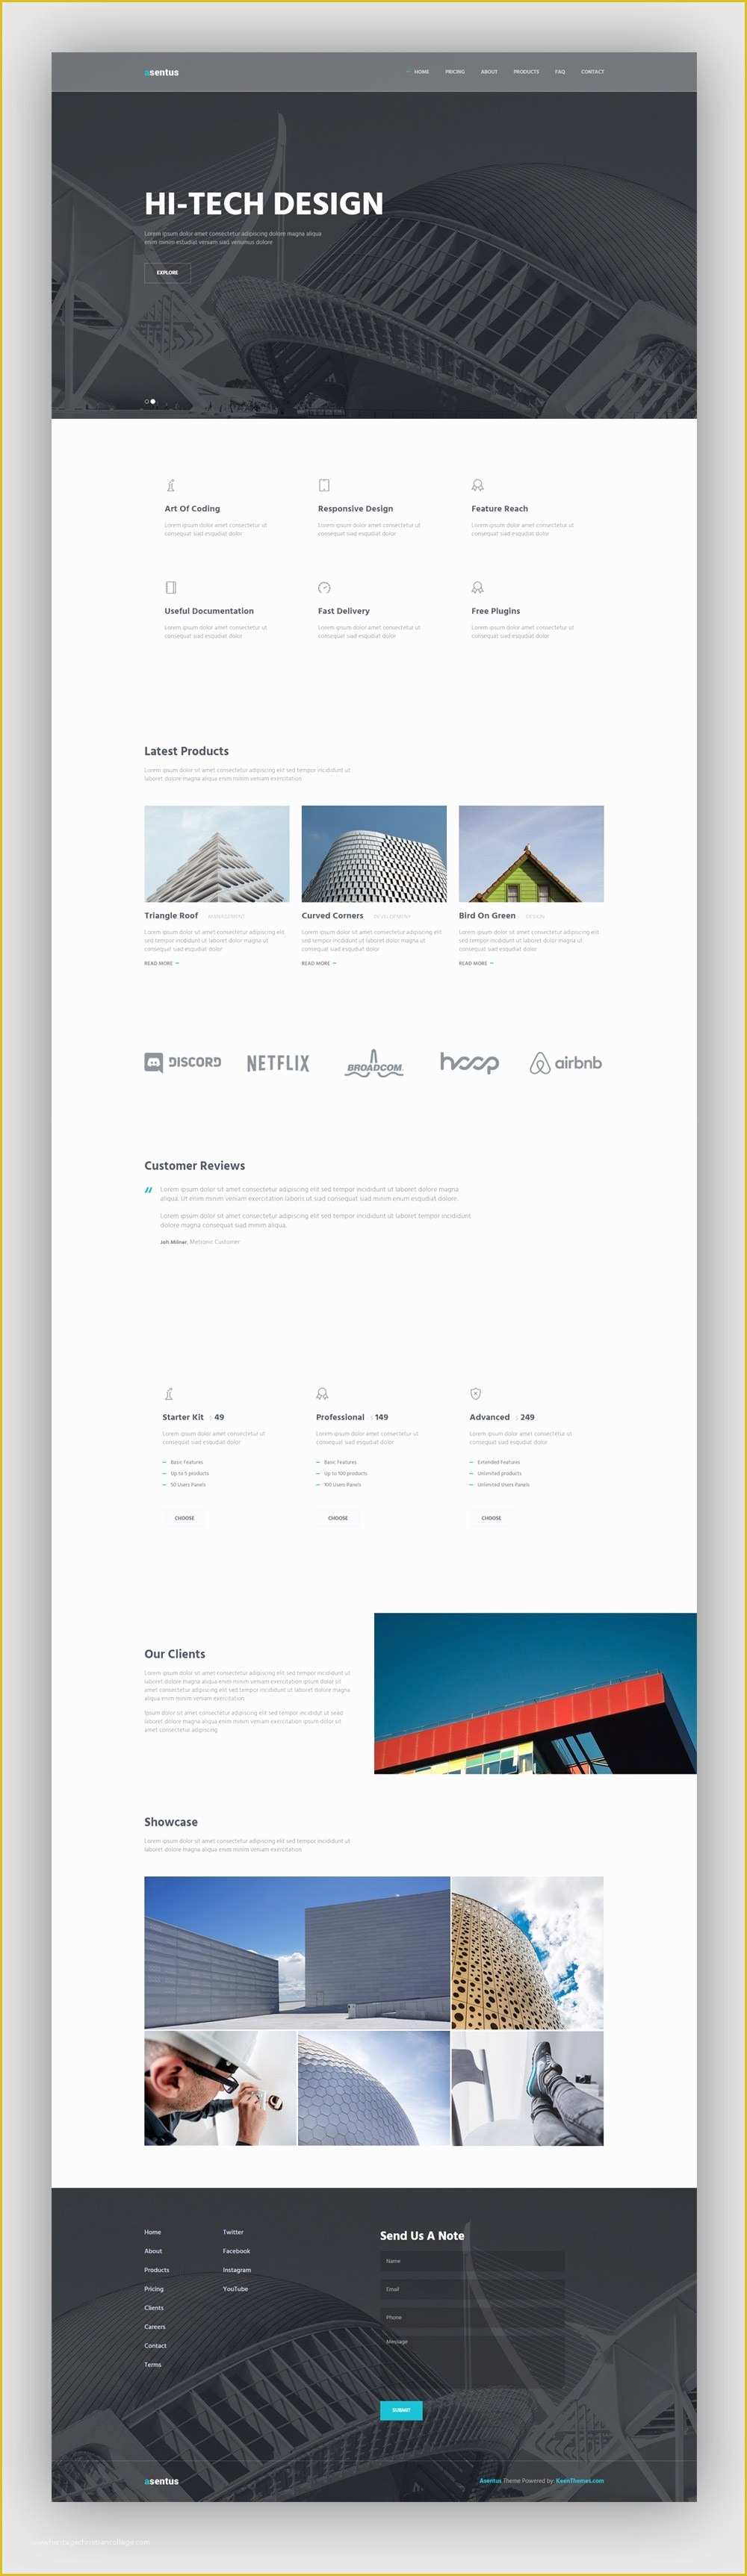 Free Bootstrap Templates 2016 Of asentus Free Bootstrap Corporate HTML Template Graphicsfuel